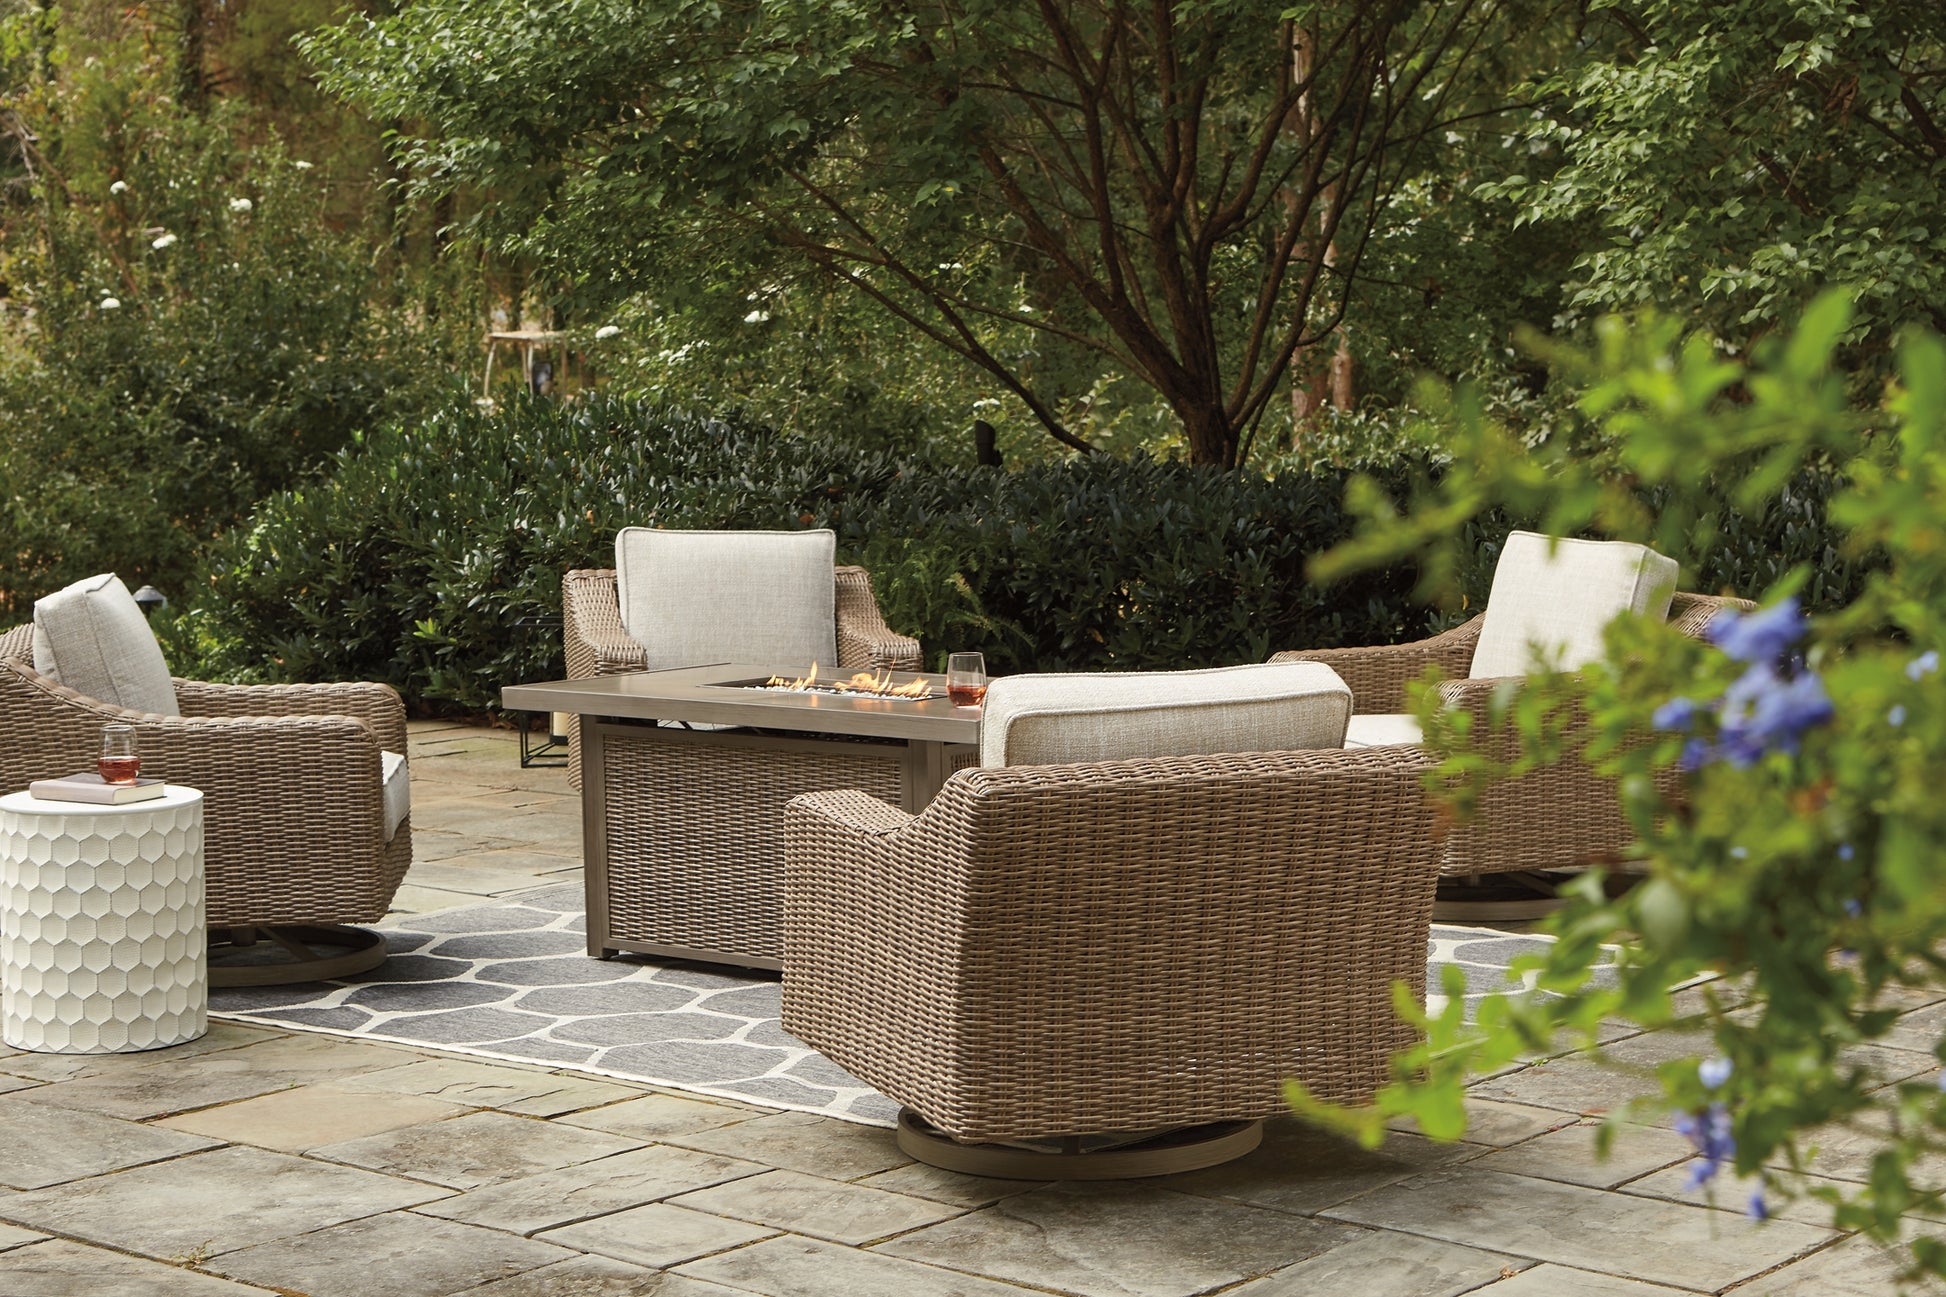 Beachcroft Outdoor Dining Table and 4 Chairs Signature Design by Ashley®